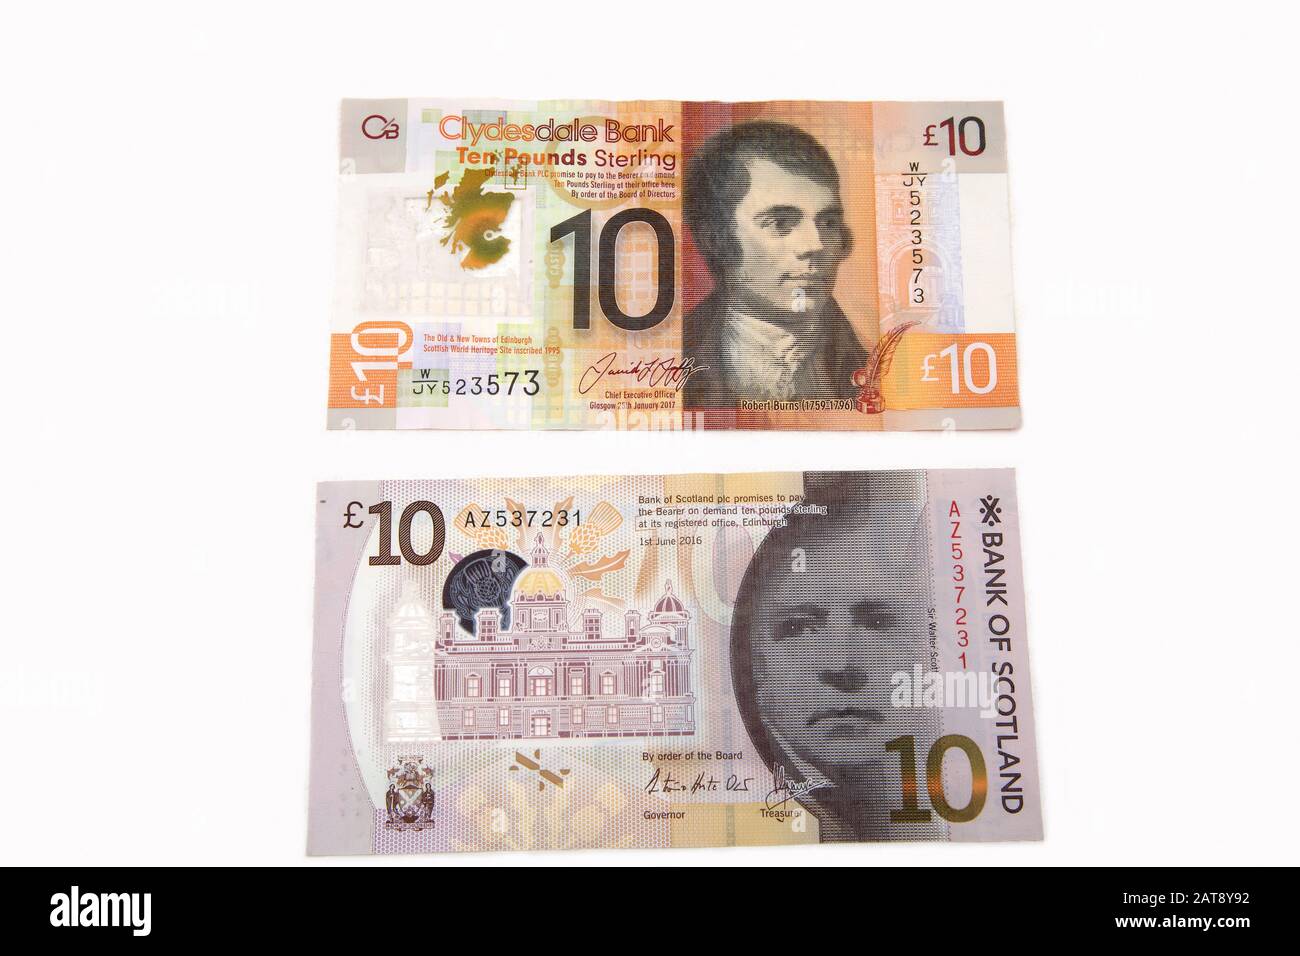 Two Scottish Ten Pound Notes - Bank of Scotland And Clydesdale Bank depicting Robert Burns and Sir Walter Scott Stock Photo